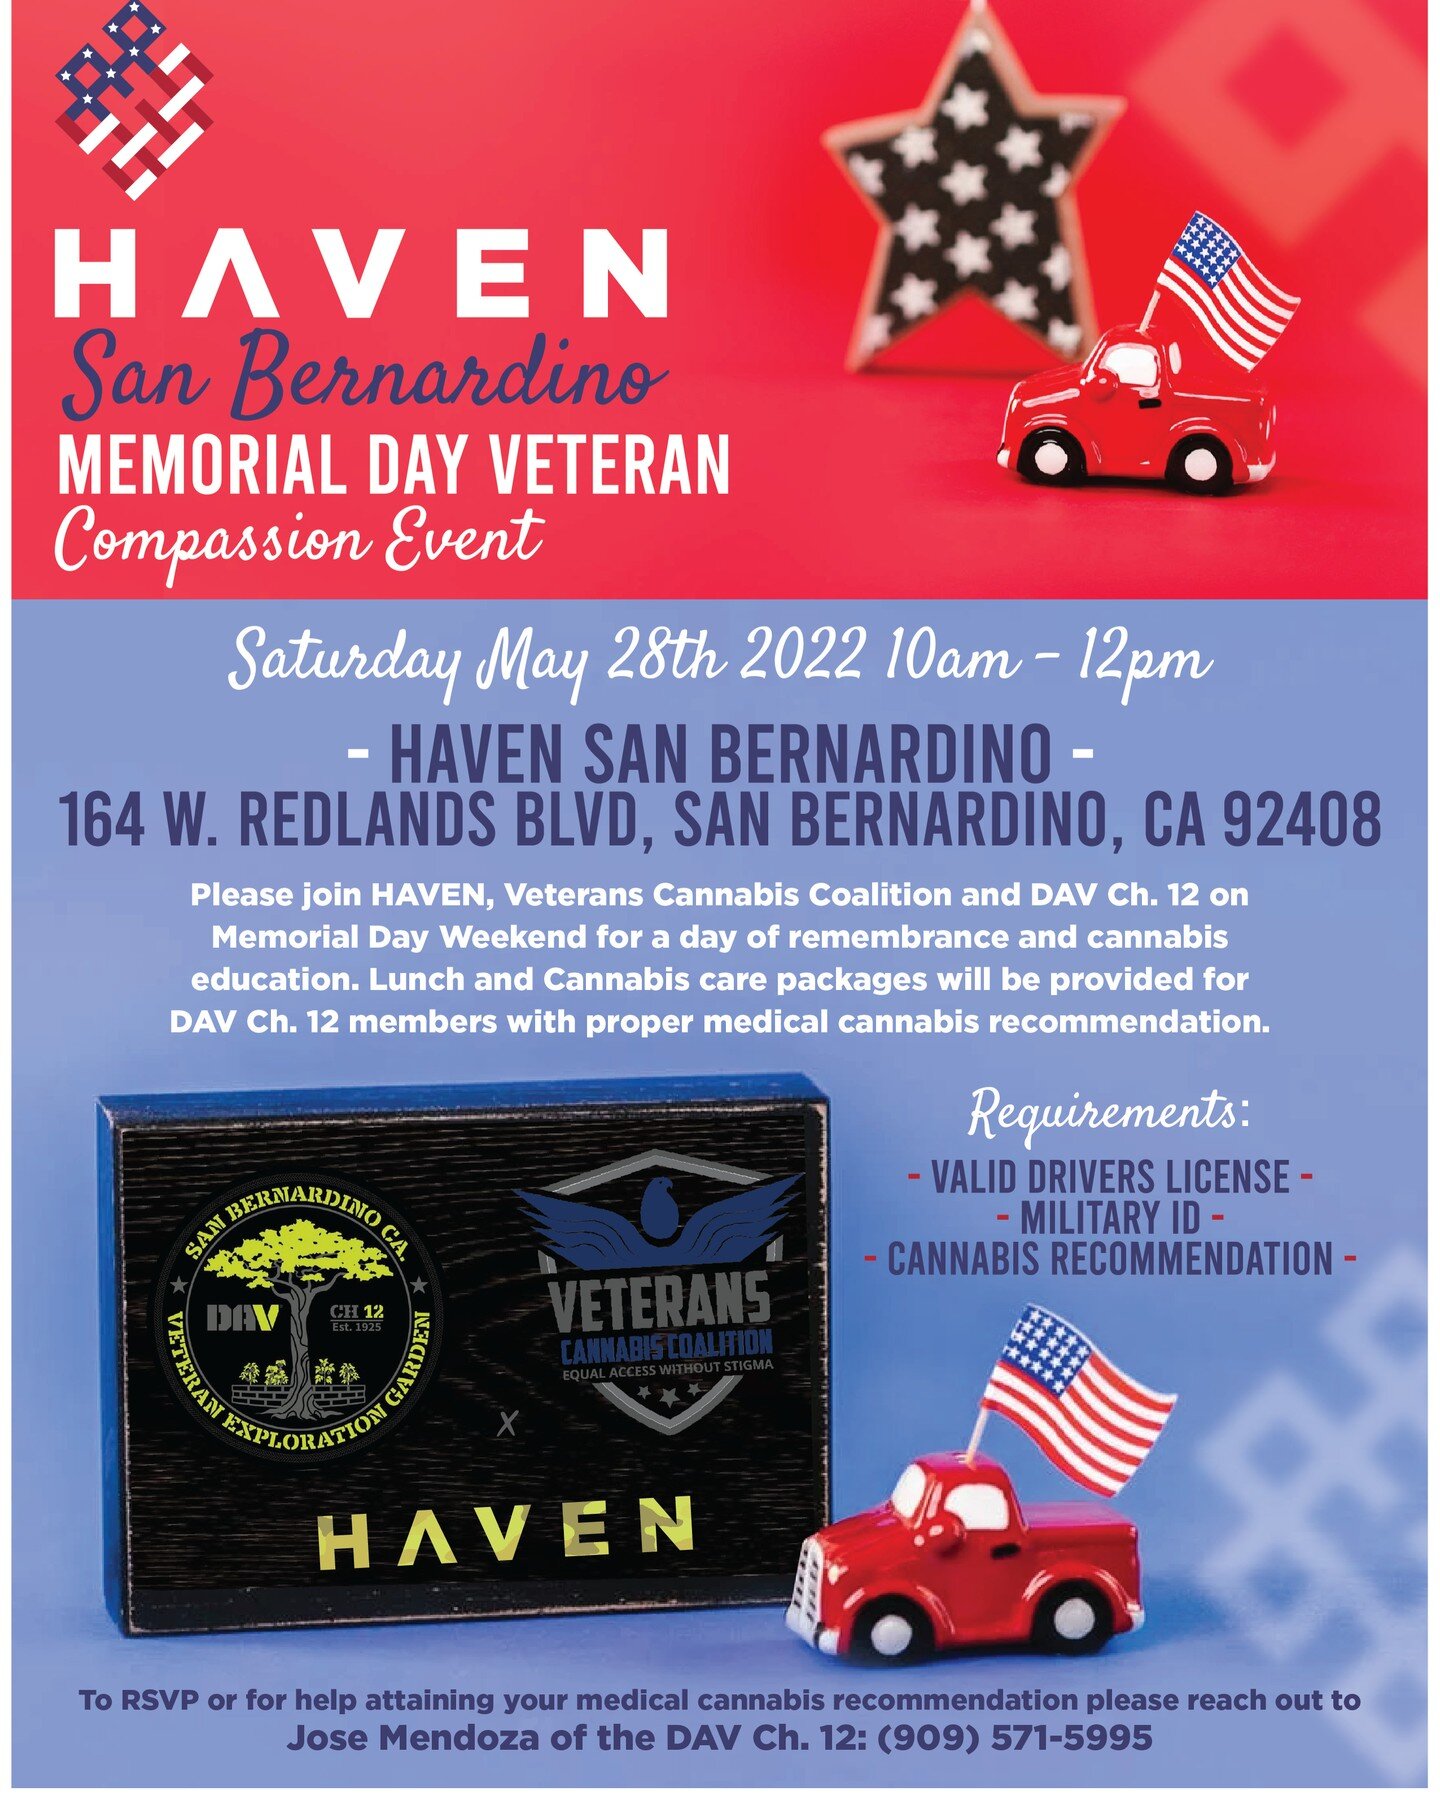 #InlandEmpire #California #veterans: there's an #SB34 donation coming your way this weekend, Saturday, May 28th, 10am-12pm, courtesy of @yourhaven_sanbernardino @yourhavenstores and #DAVChapter12 #SanBernardino.

@eric_actual and @kannabis.shelly wil